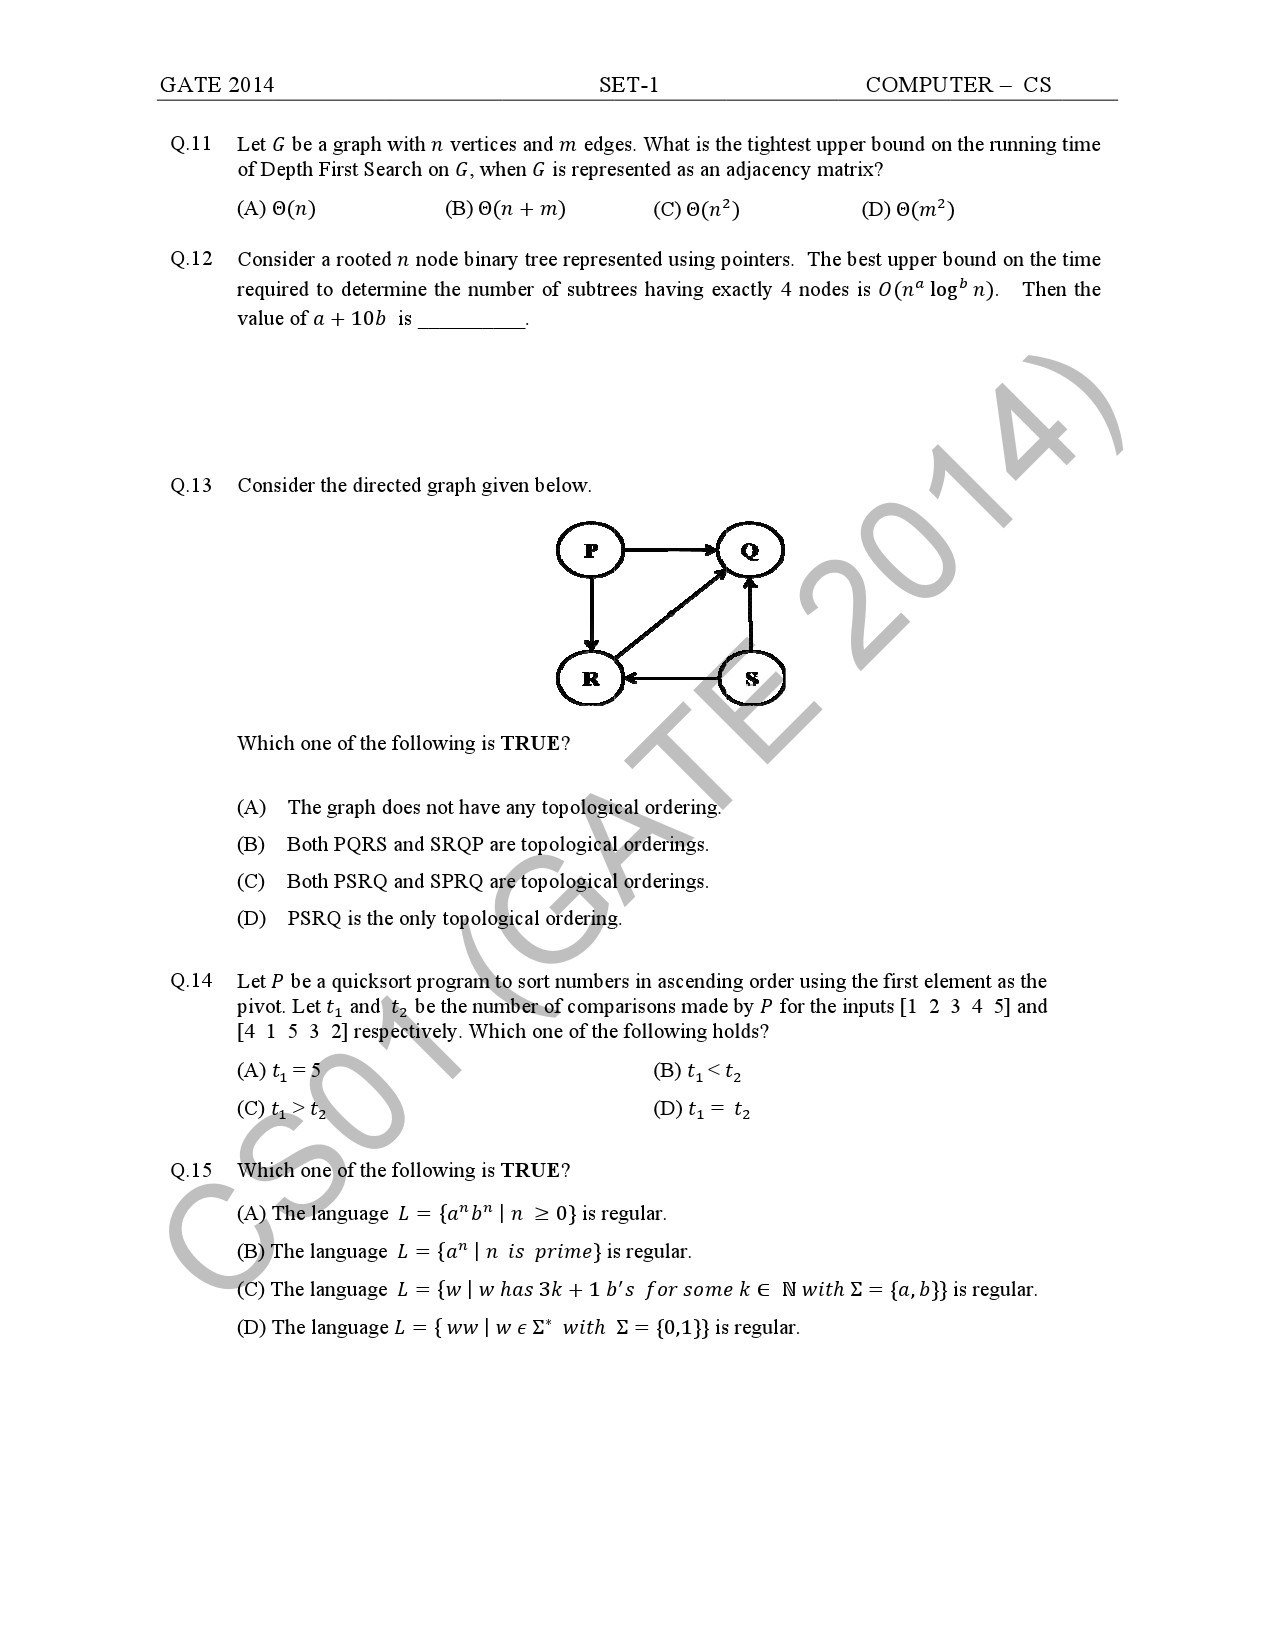 GATE Exam Question Paper 2014 Computer Science and Information Technology Set 1 9